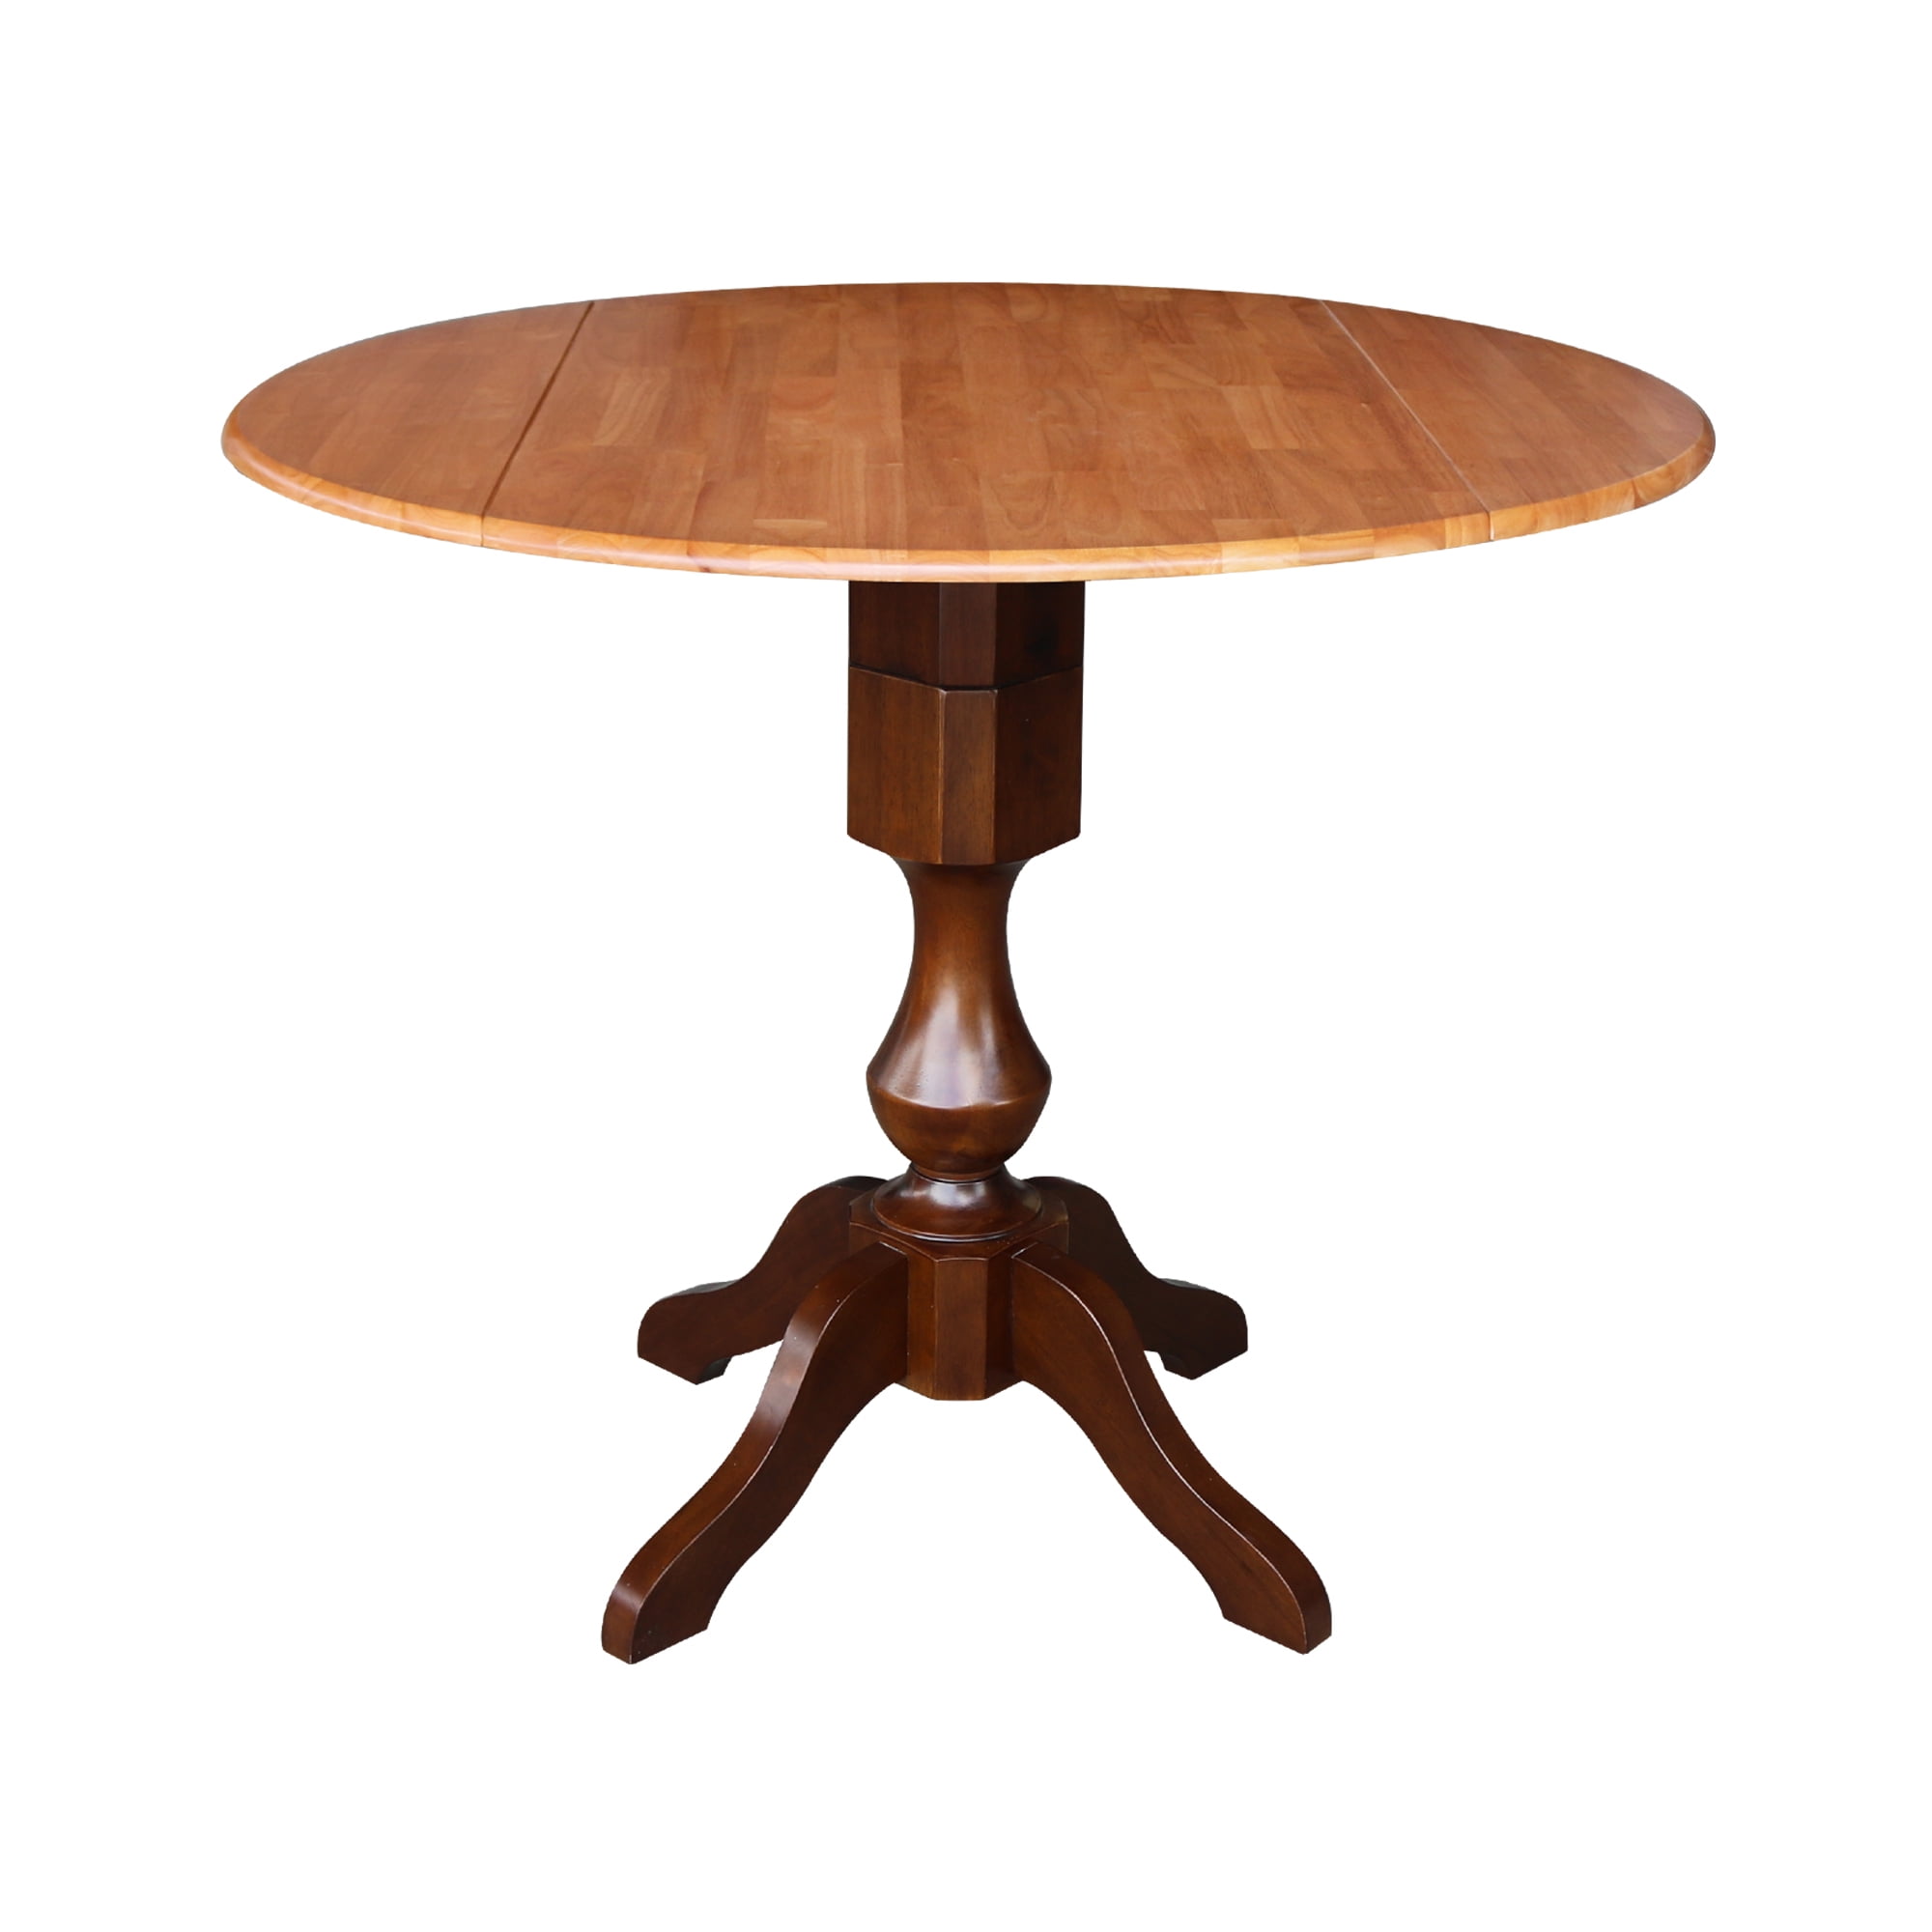 42" Round Solid Wood Cinnamon/Espresso Dual Drop Leaf Pedestal Counter Height Table by International Concepts